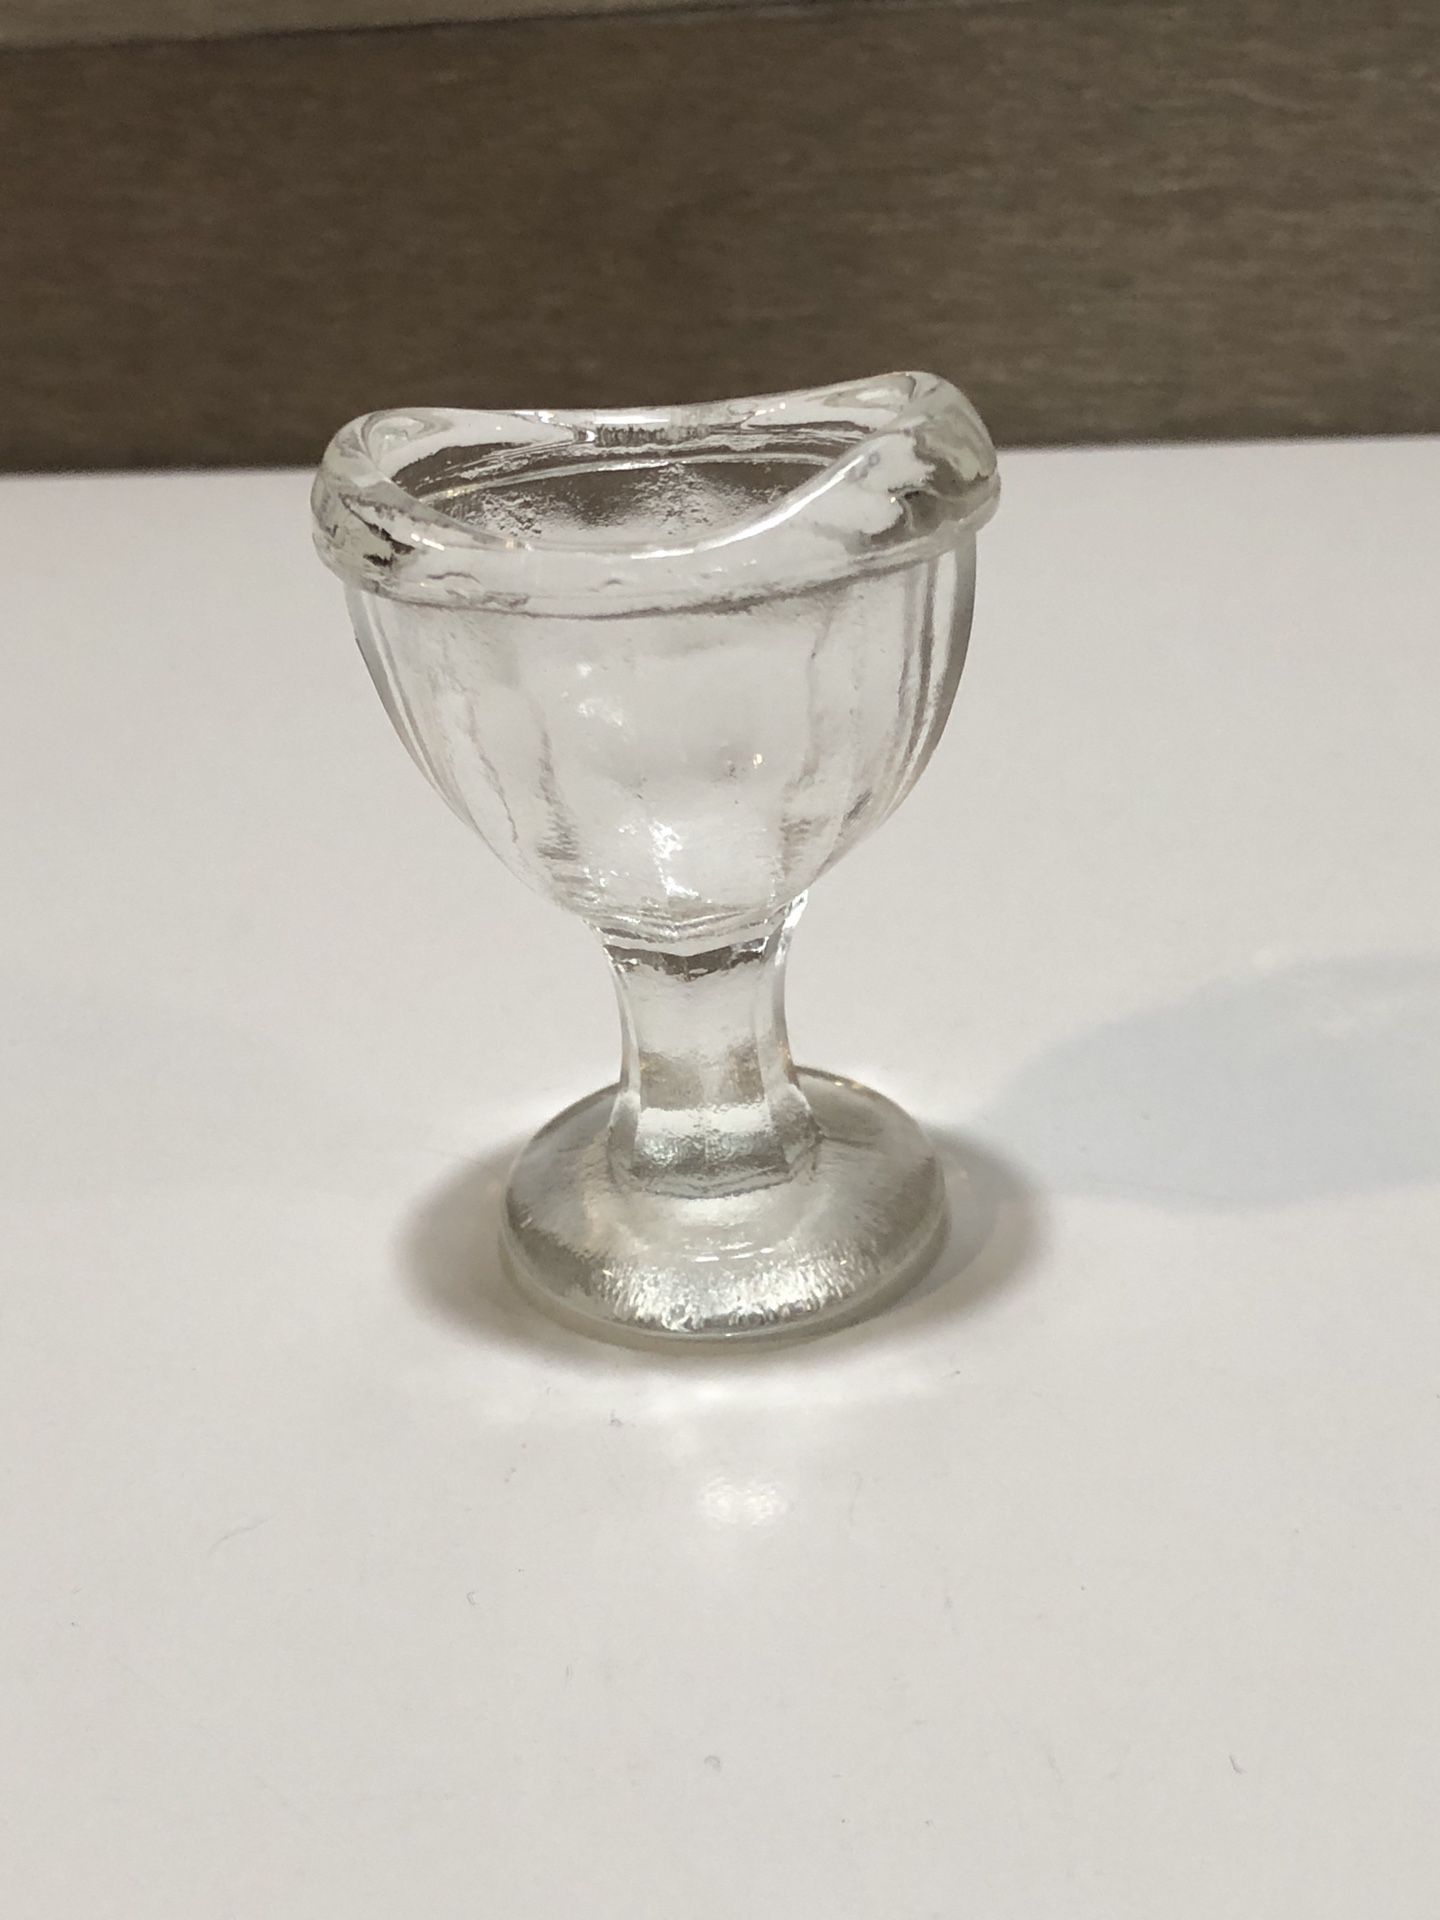 ANTIQUE Clear Glass Eye WashCup Glass - 2"x1".